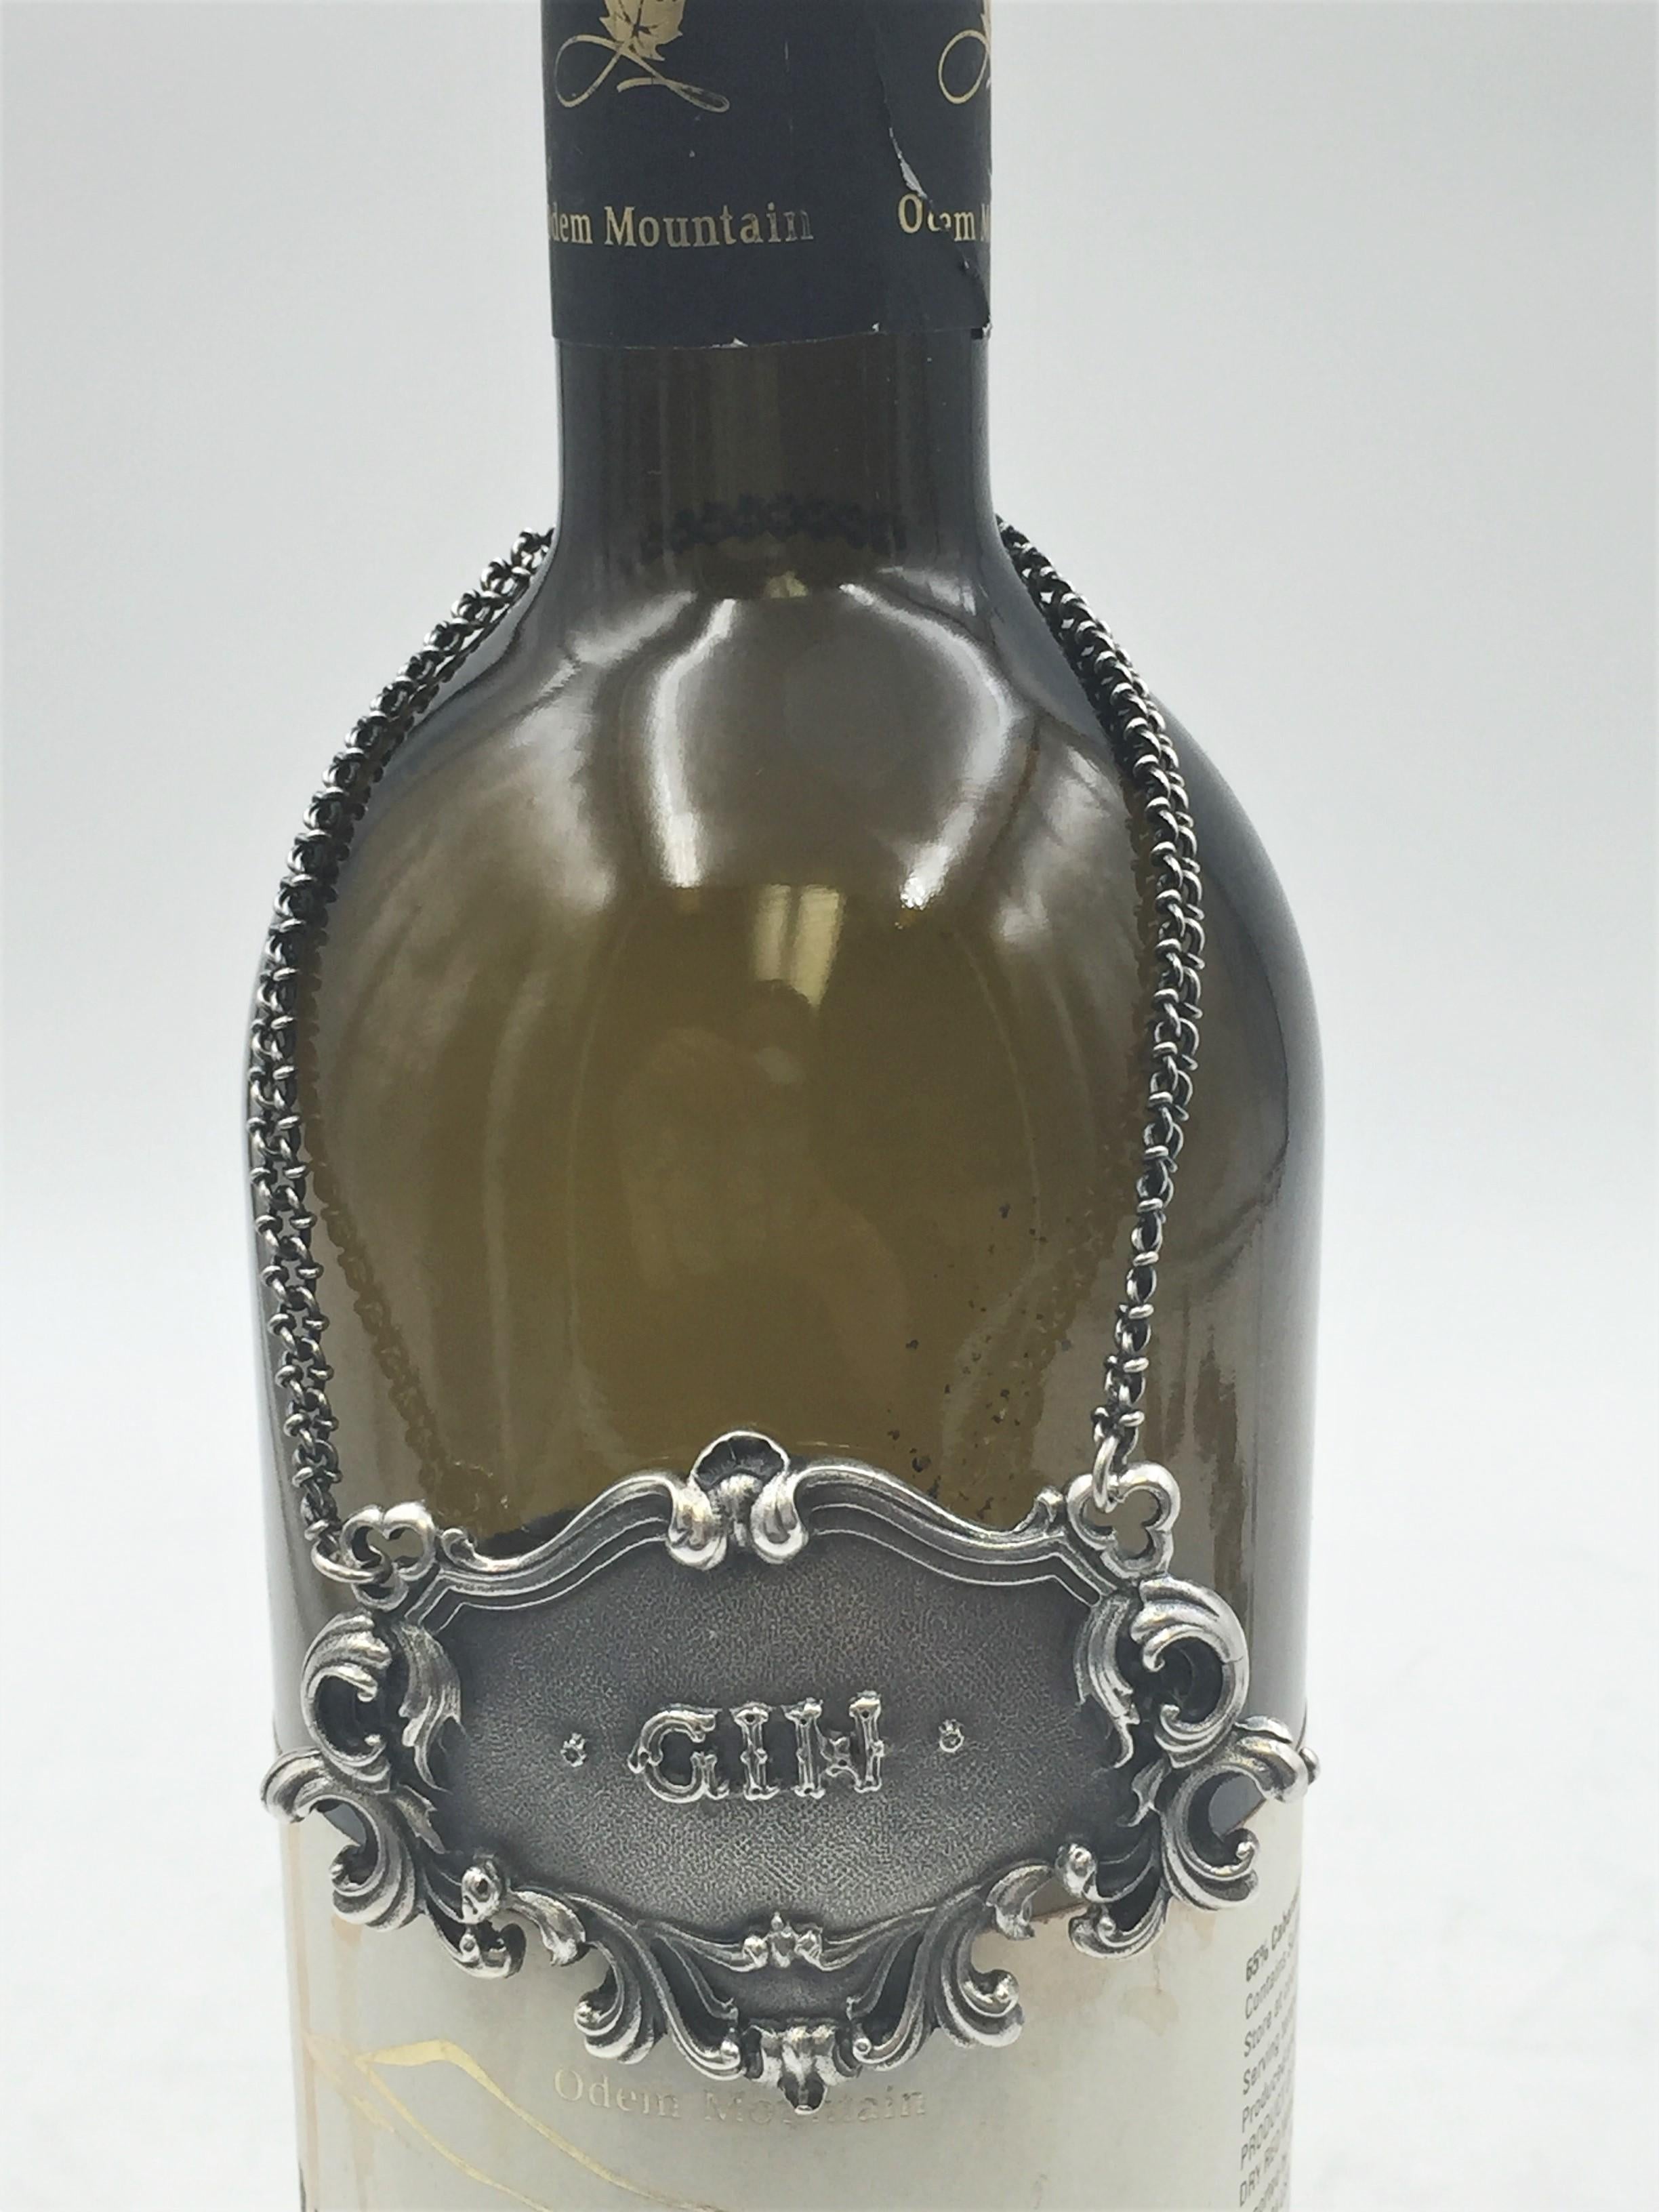 Rare Buccellati sterling silver claret bar jug label. GIN embossed on the front in the center.

Marks on the back: Gianmaria Buccellati (signature and Italian maker's mark), ITALY, 925 (encircled silver purity mark).

It measures 2.5in x 1.75in.